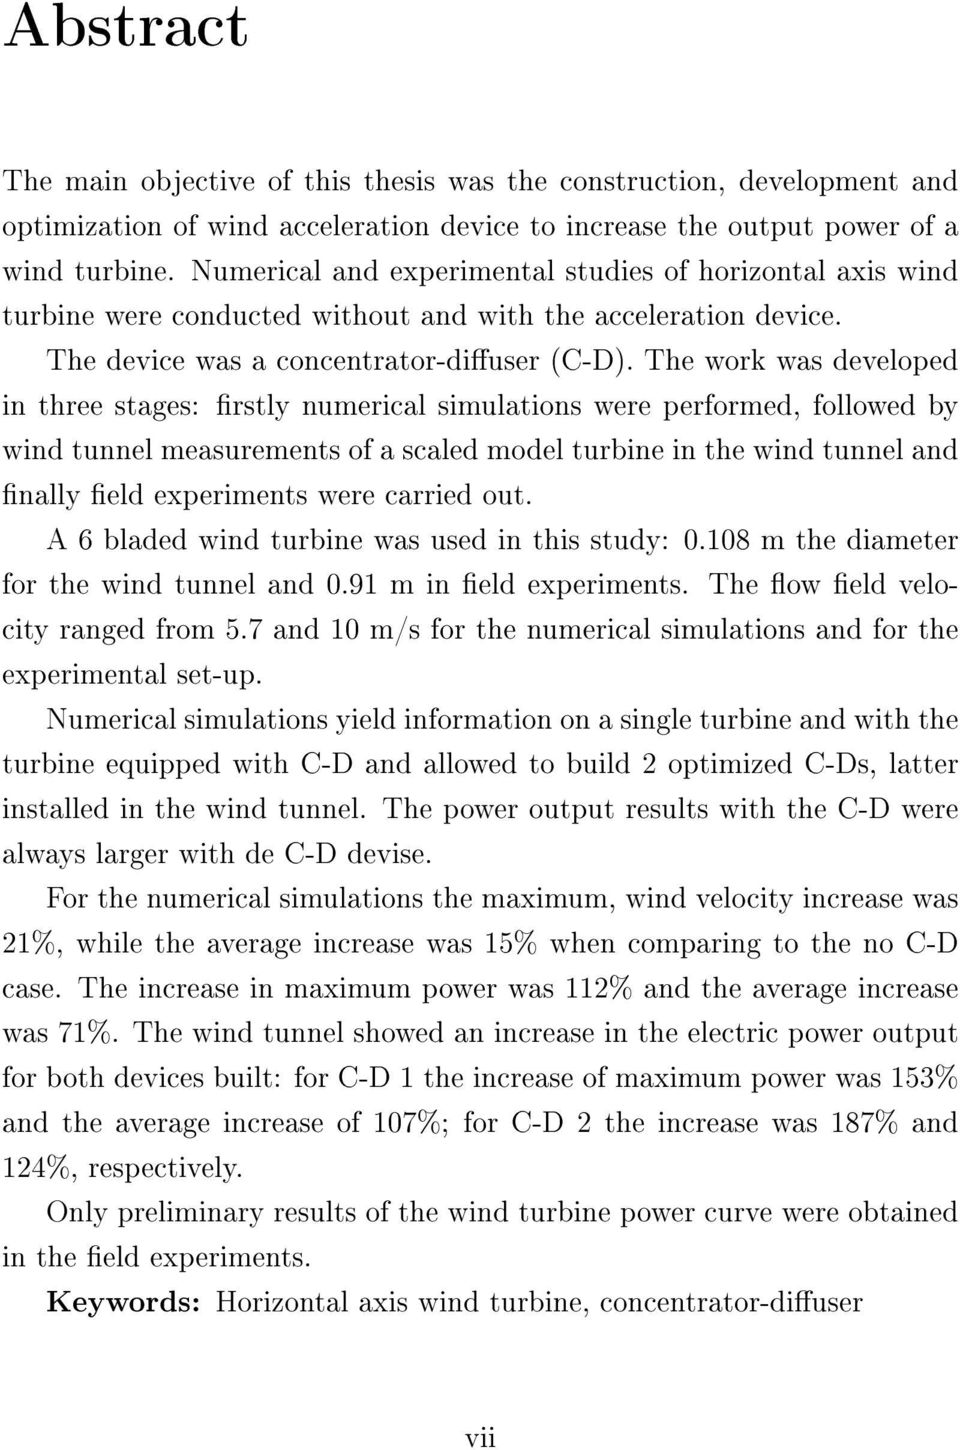 The work was developed in three stages: rstly numerical simulations were performed, followed by wind tunnel measurements of a scaled model turbine in the wind tunnel and nally eld experiments were